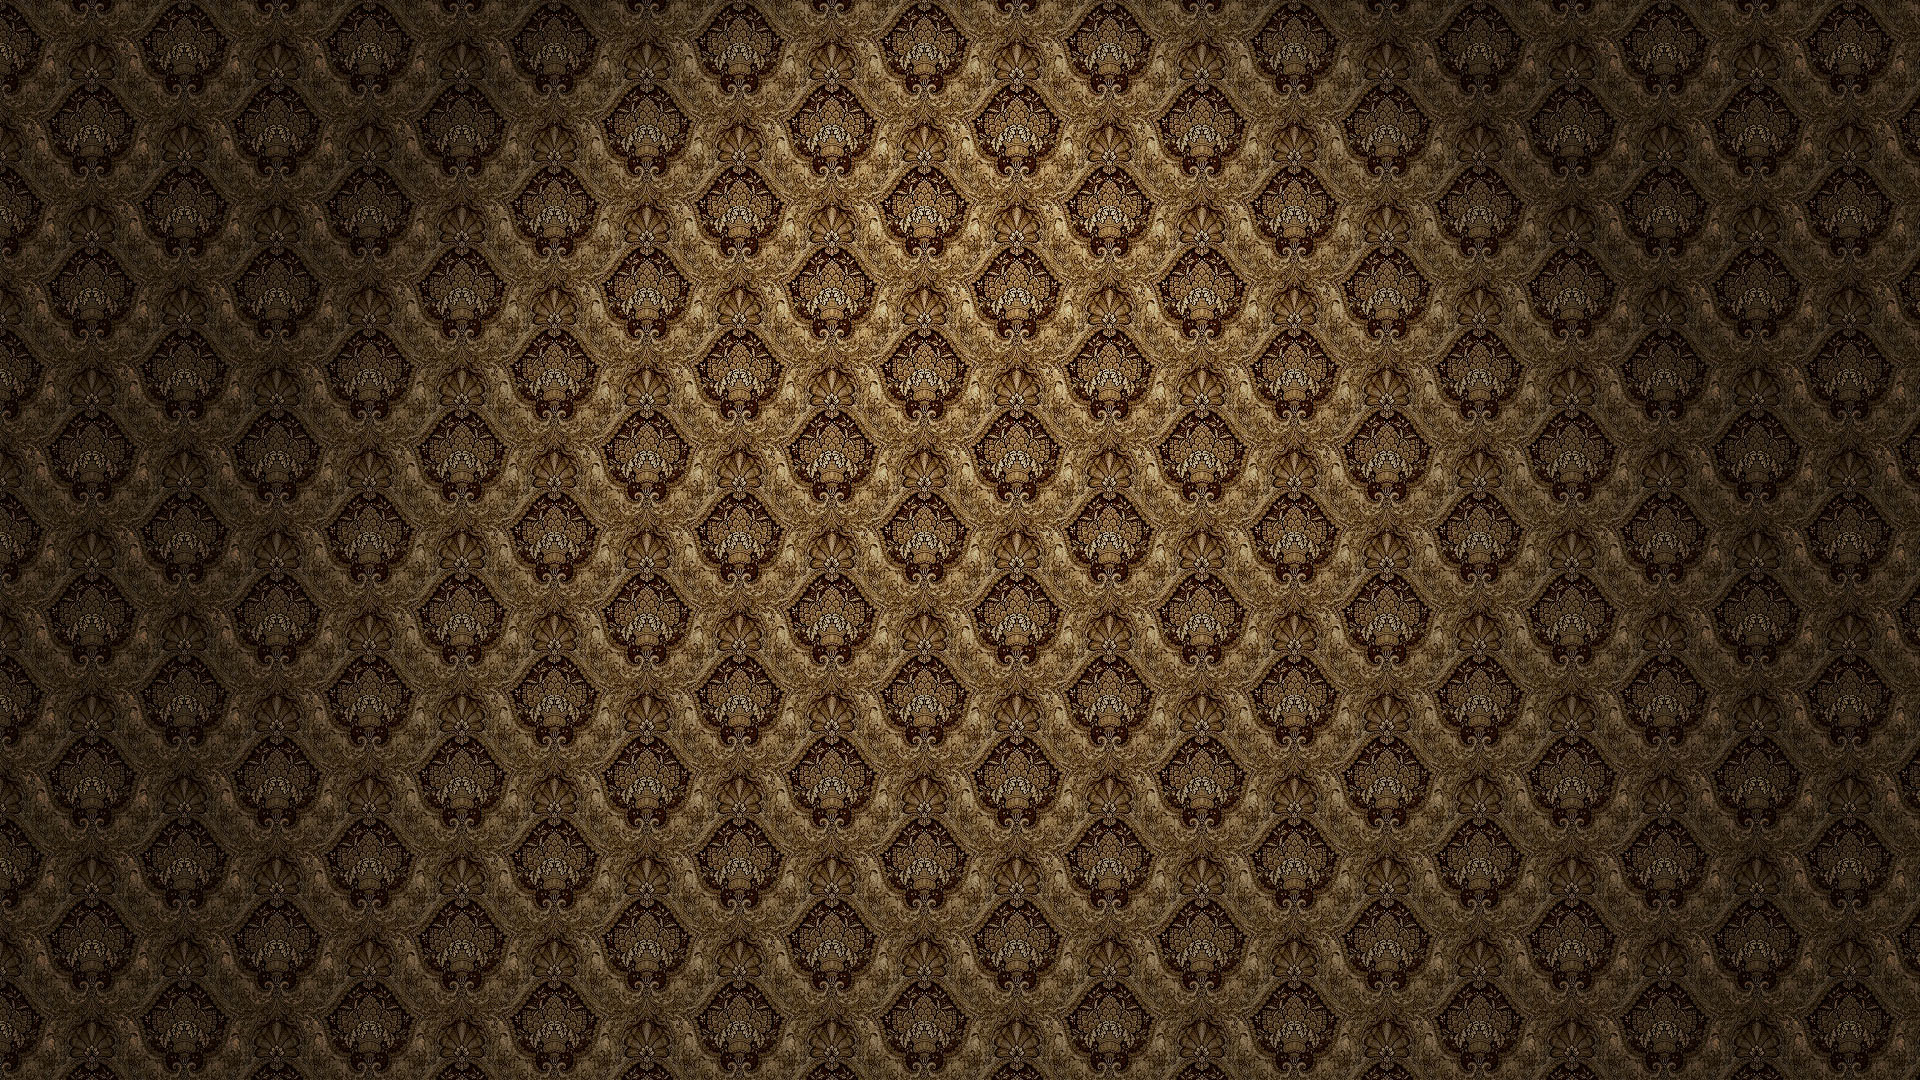 Black and Gold wallpaper 1920x1080 73949